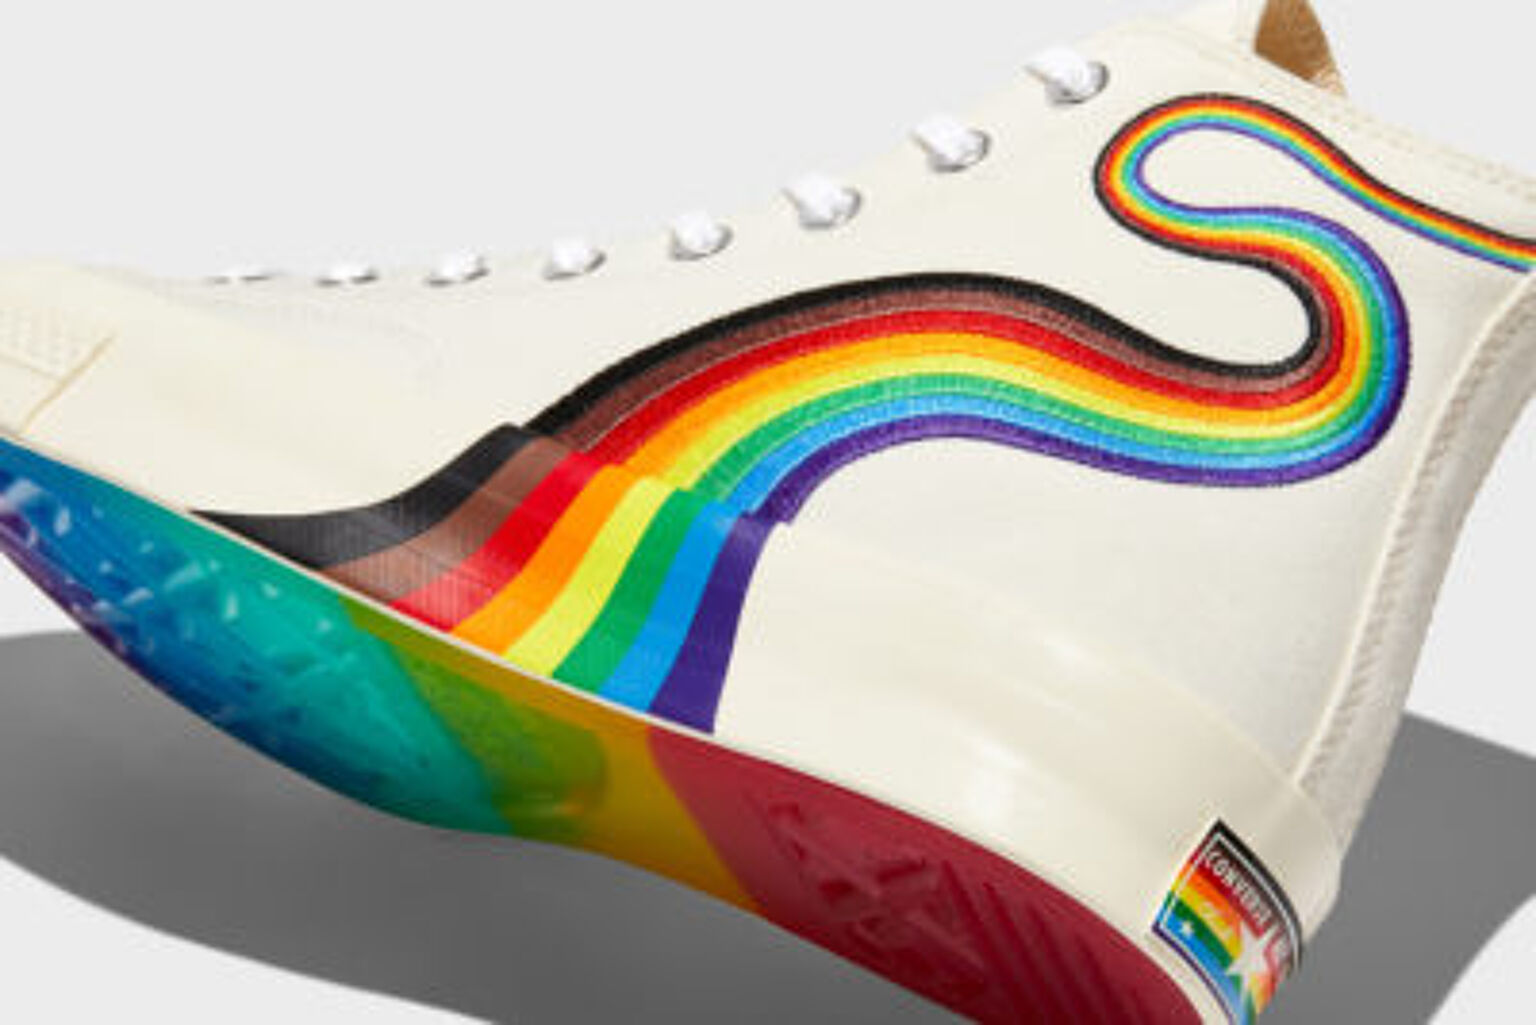 Don’t get caught slipping without Converse’s Pride slides this summer ...